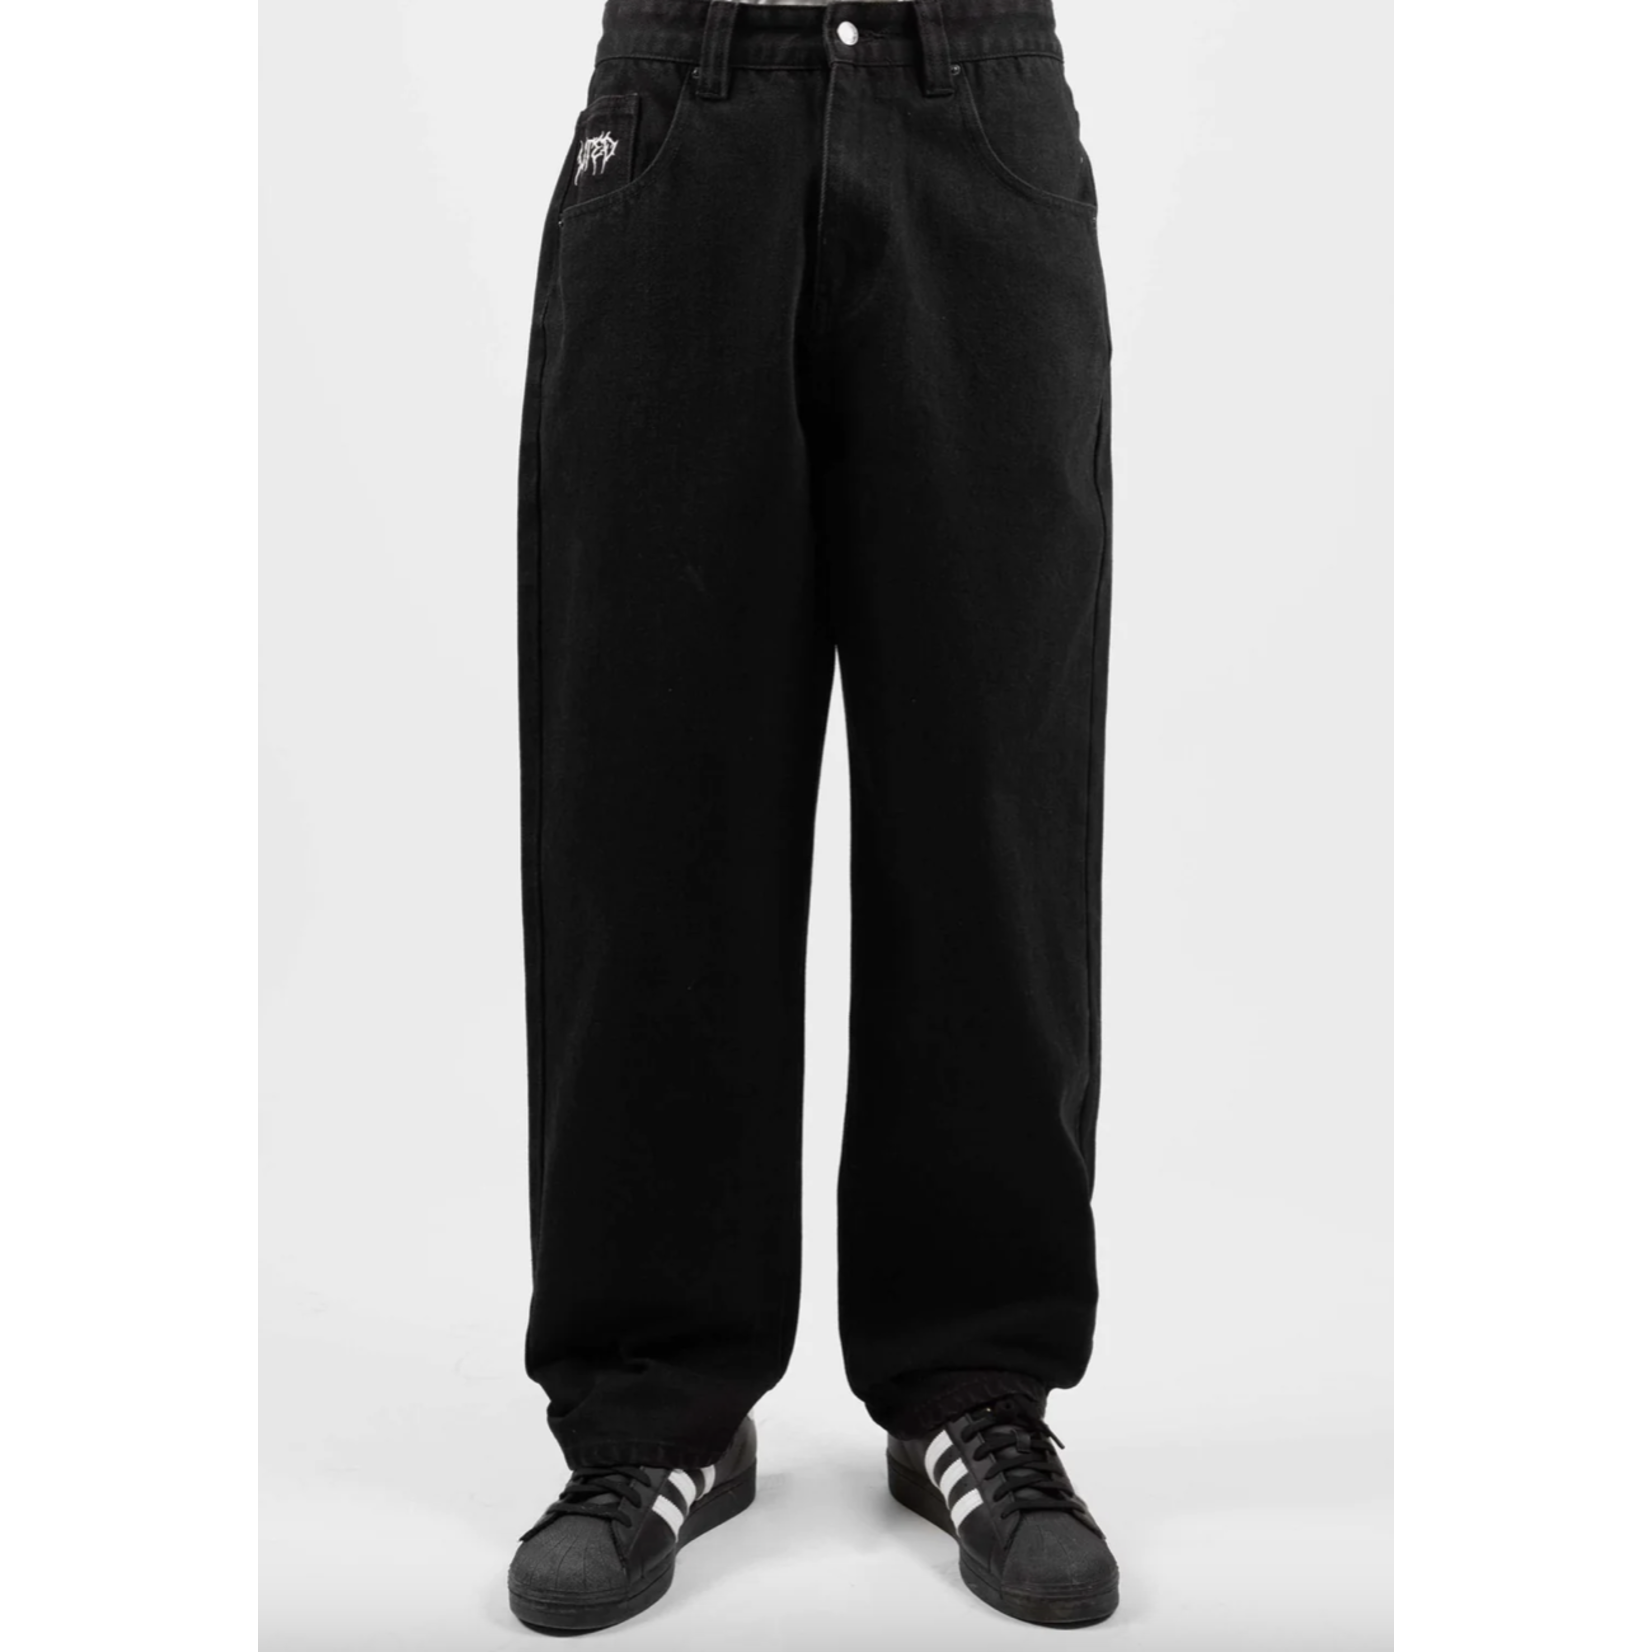 WASTED PARIS Wasted Paris - Casper Feeler Pant - Pitch Black